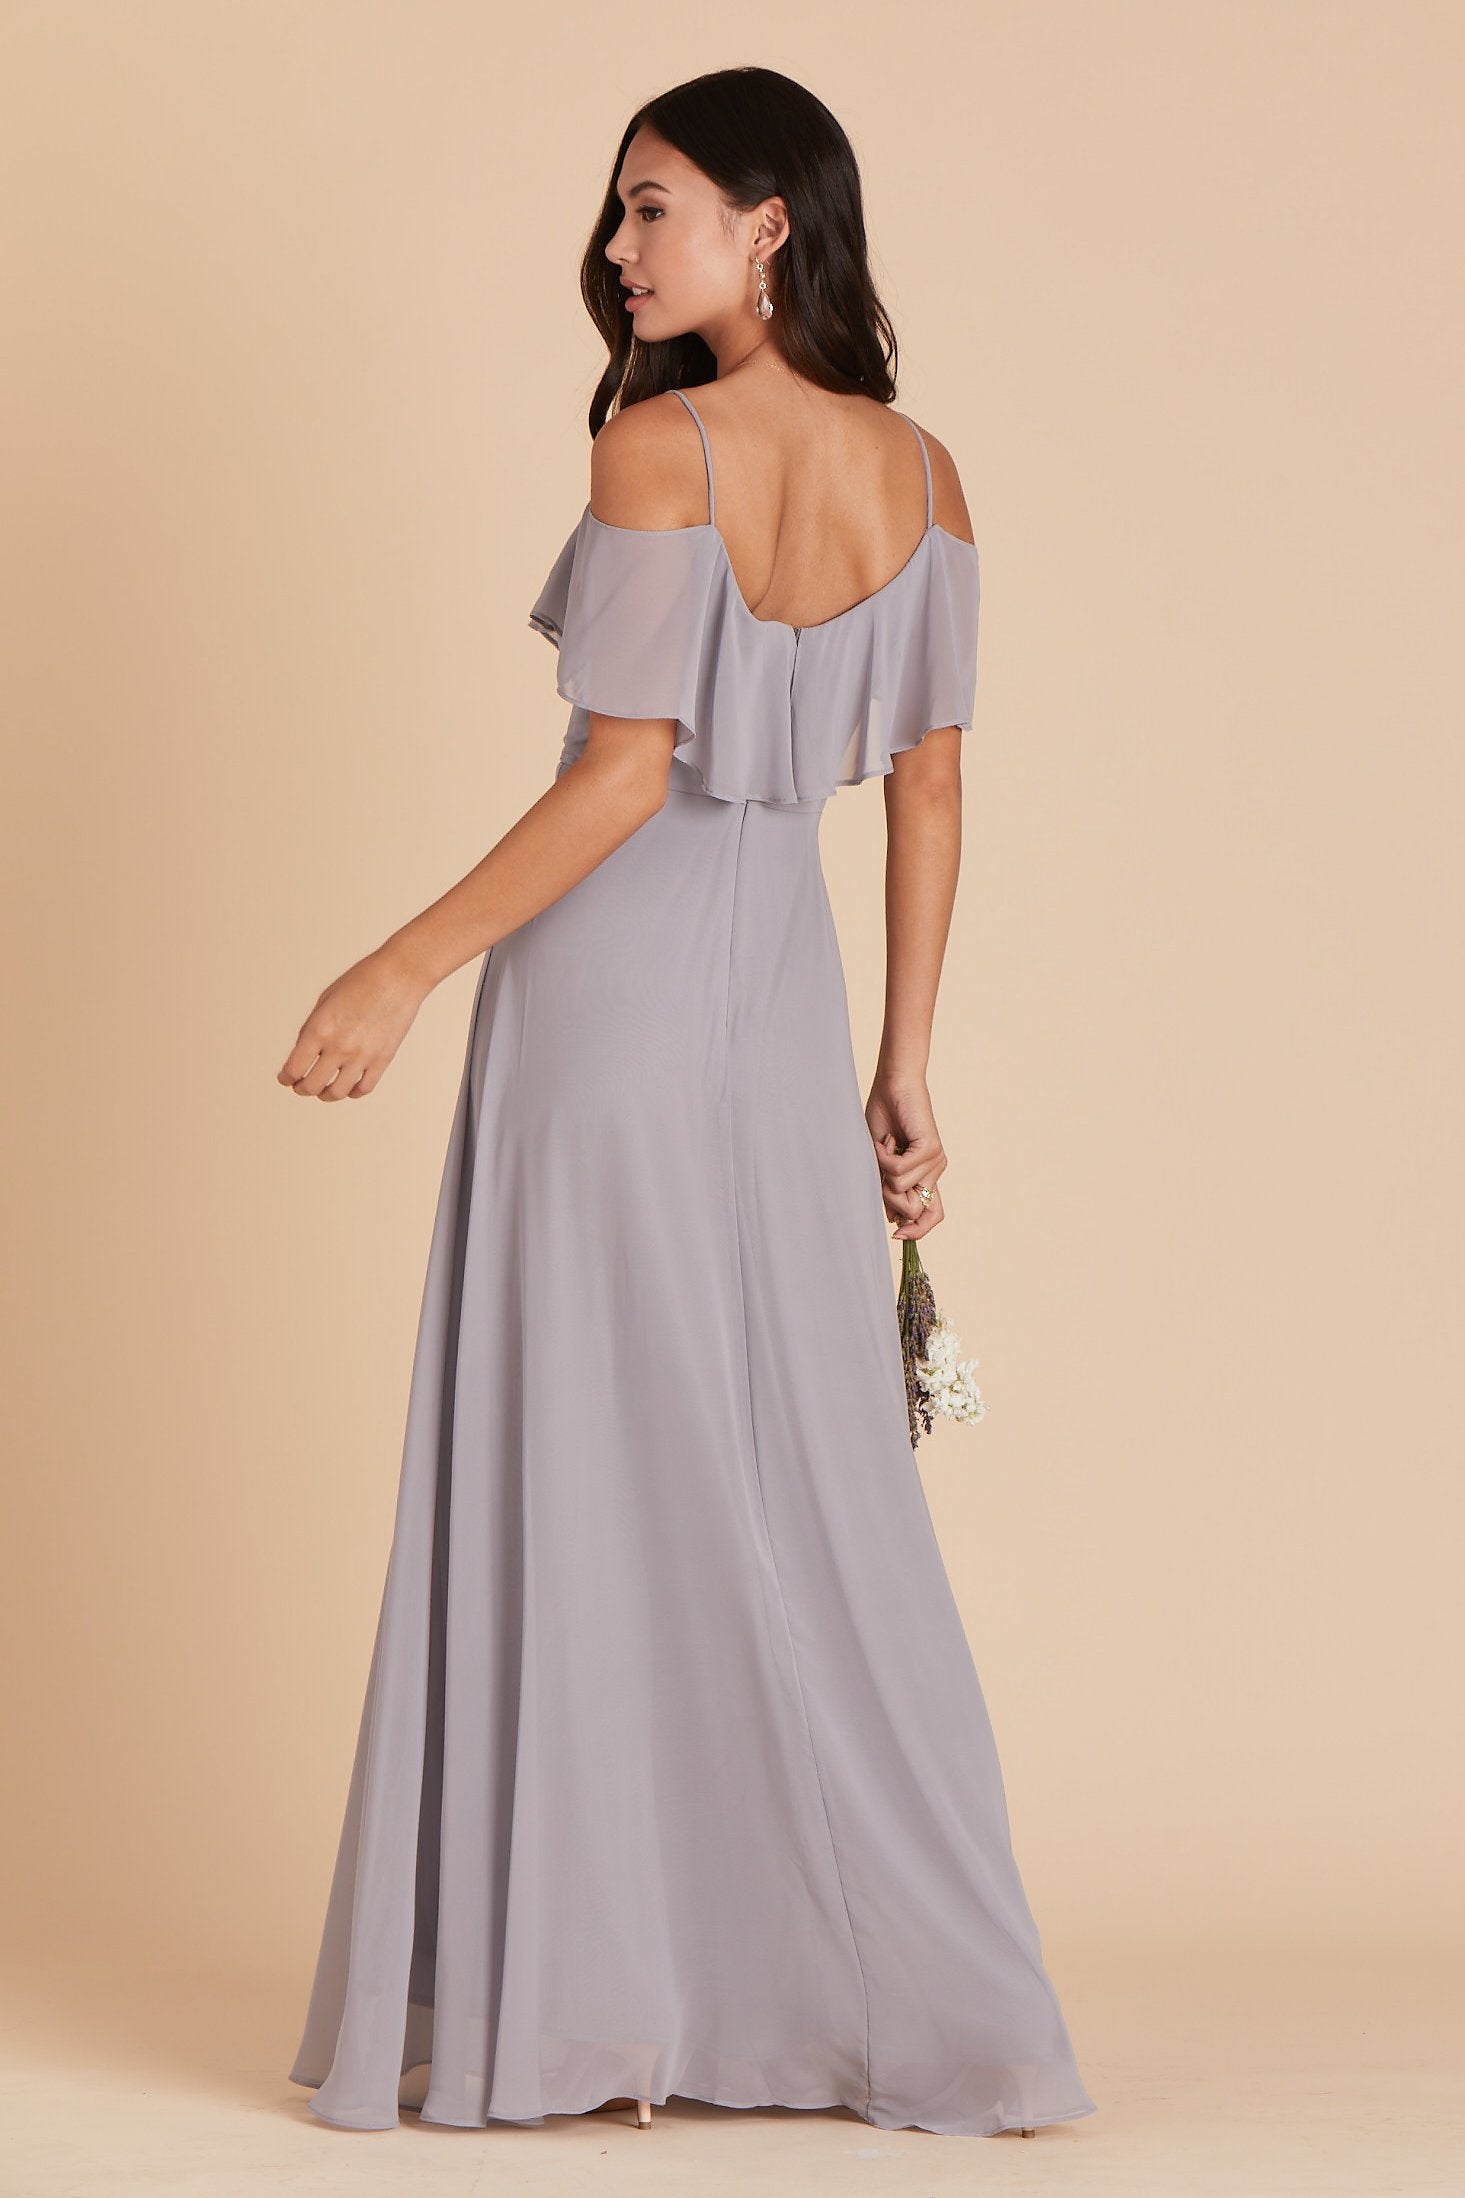 Jane convertible bridesmaid dress in silver chiffon by Birdy Grey, back view